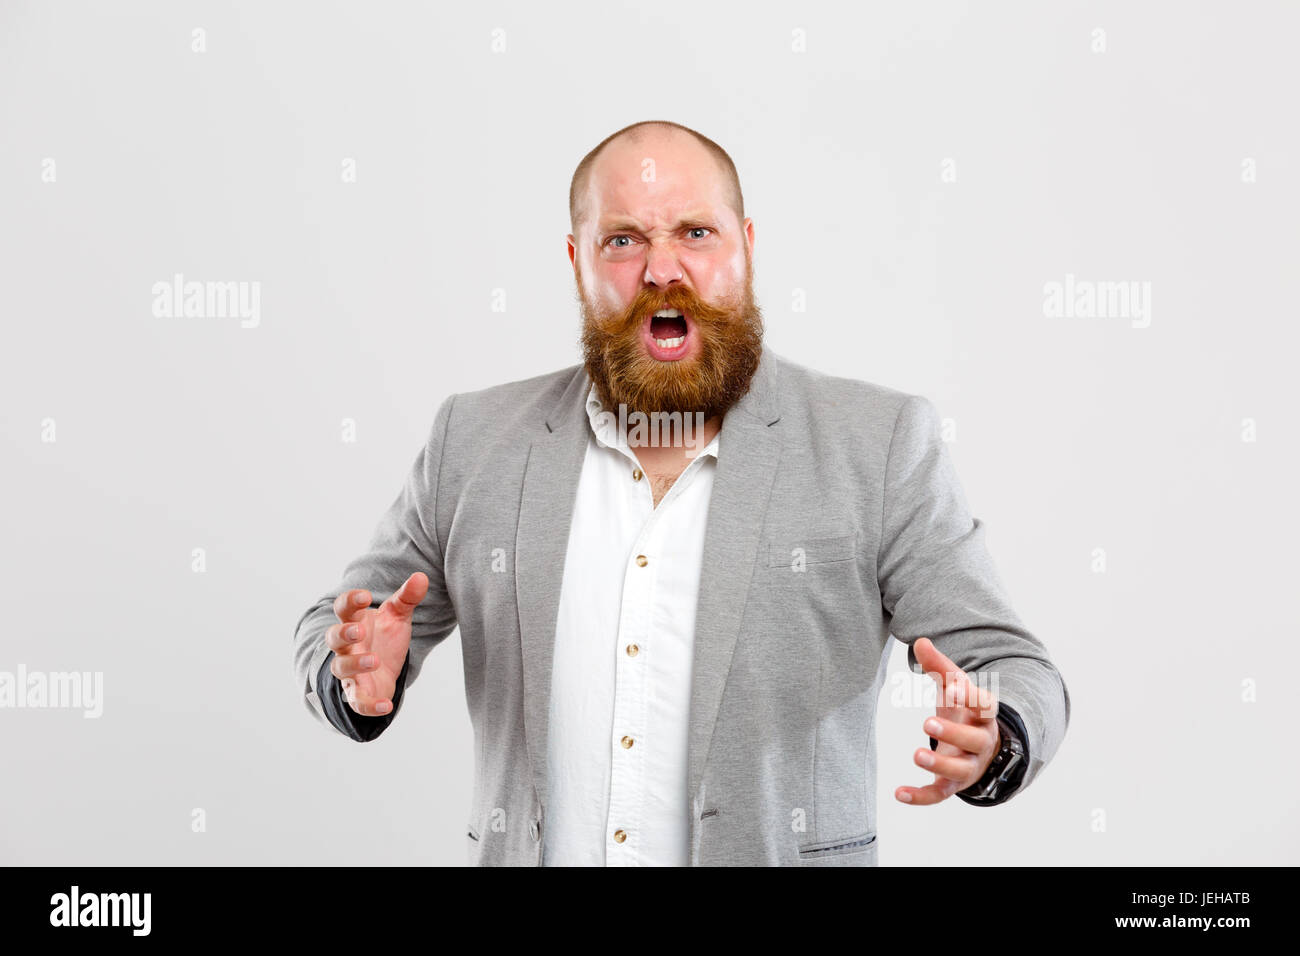 Angry, dissatisfied man with beard Stock Photo